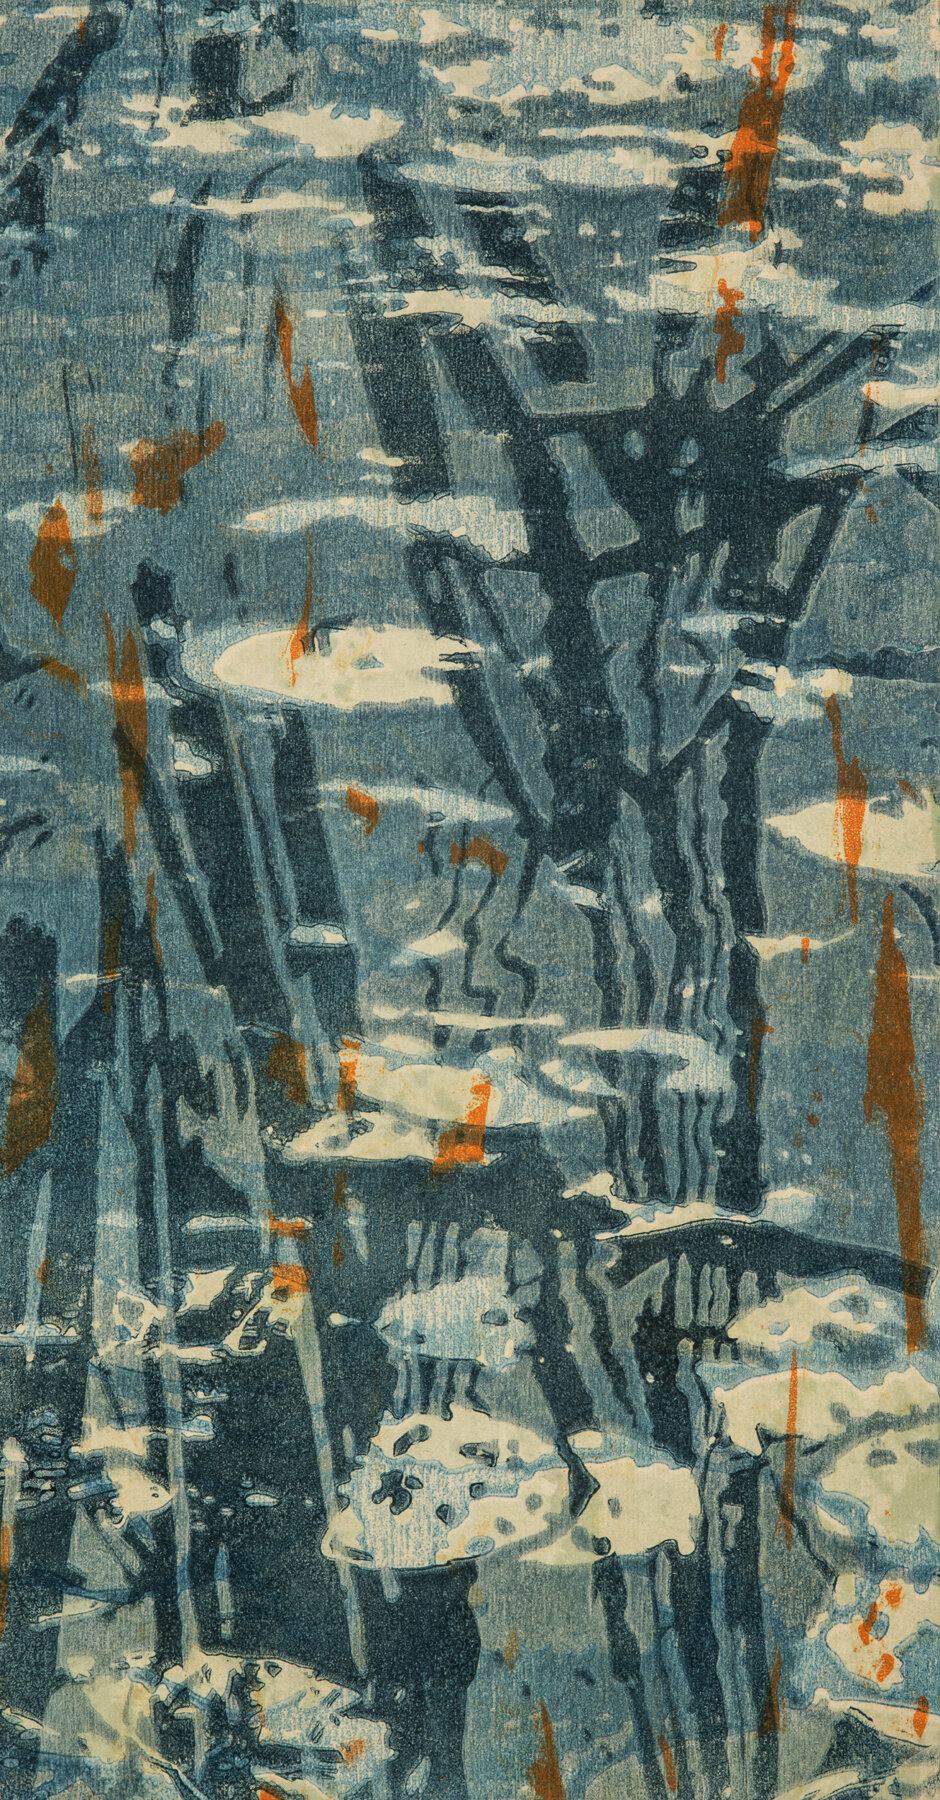  Catherine Kernan  At the Whim of the Currents #1,  2019    Woodcut monoprint   Image: 19 x 10 inches   Paper: 26 x 16 inches  